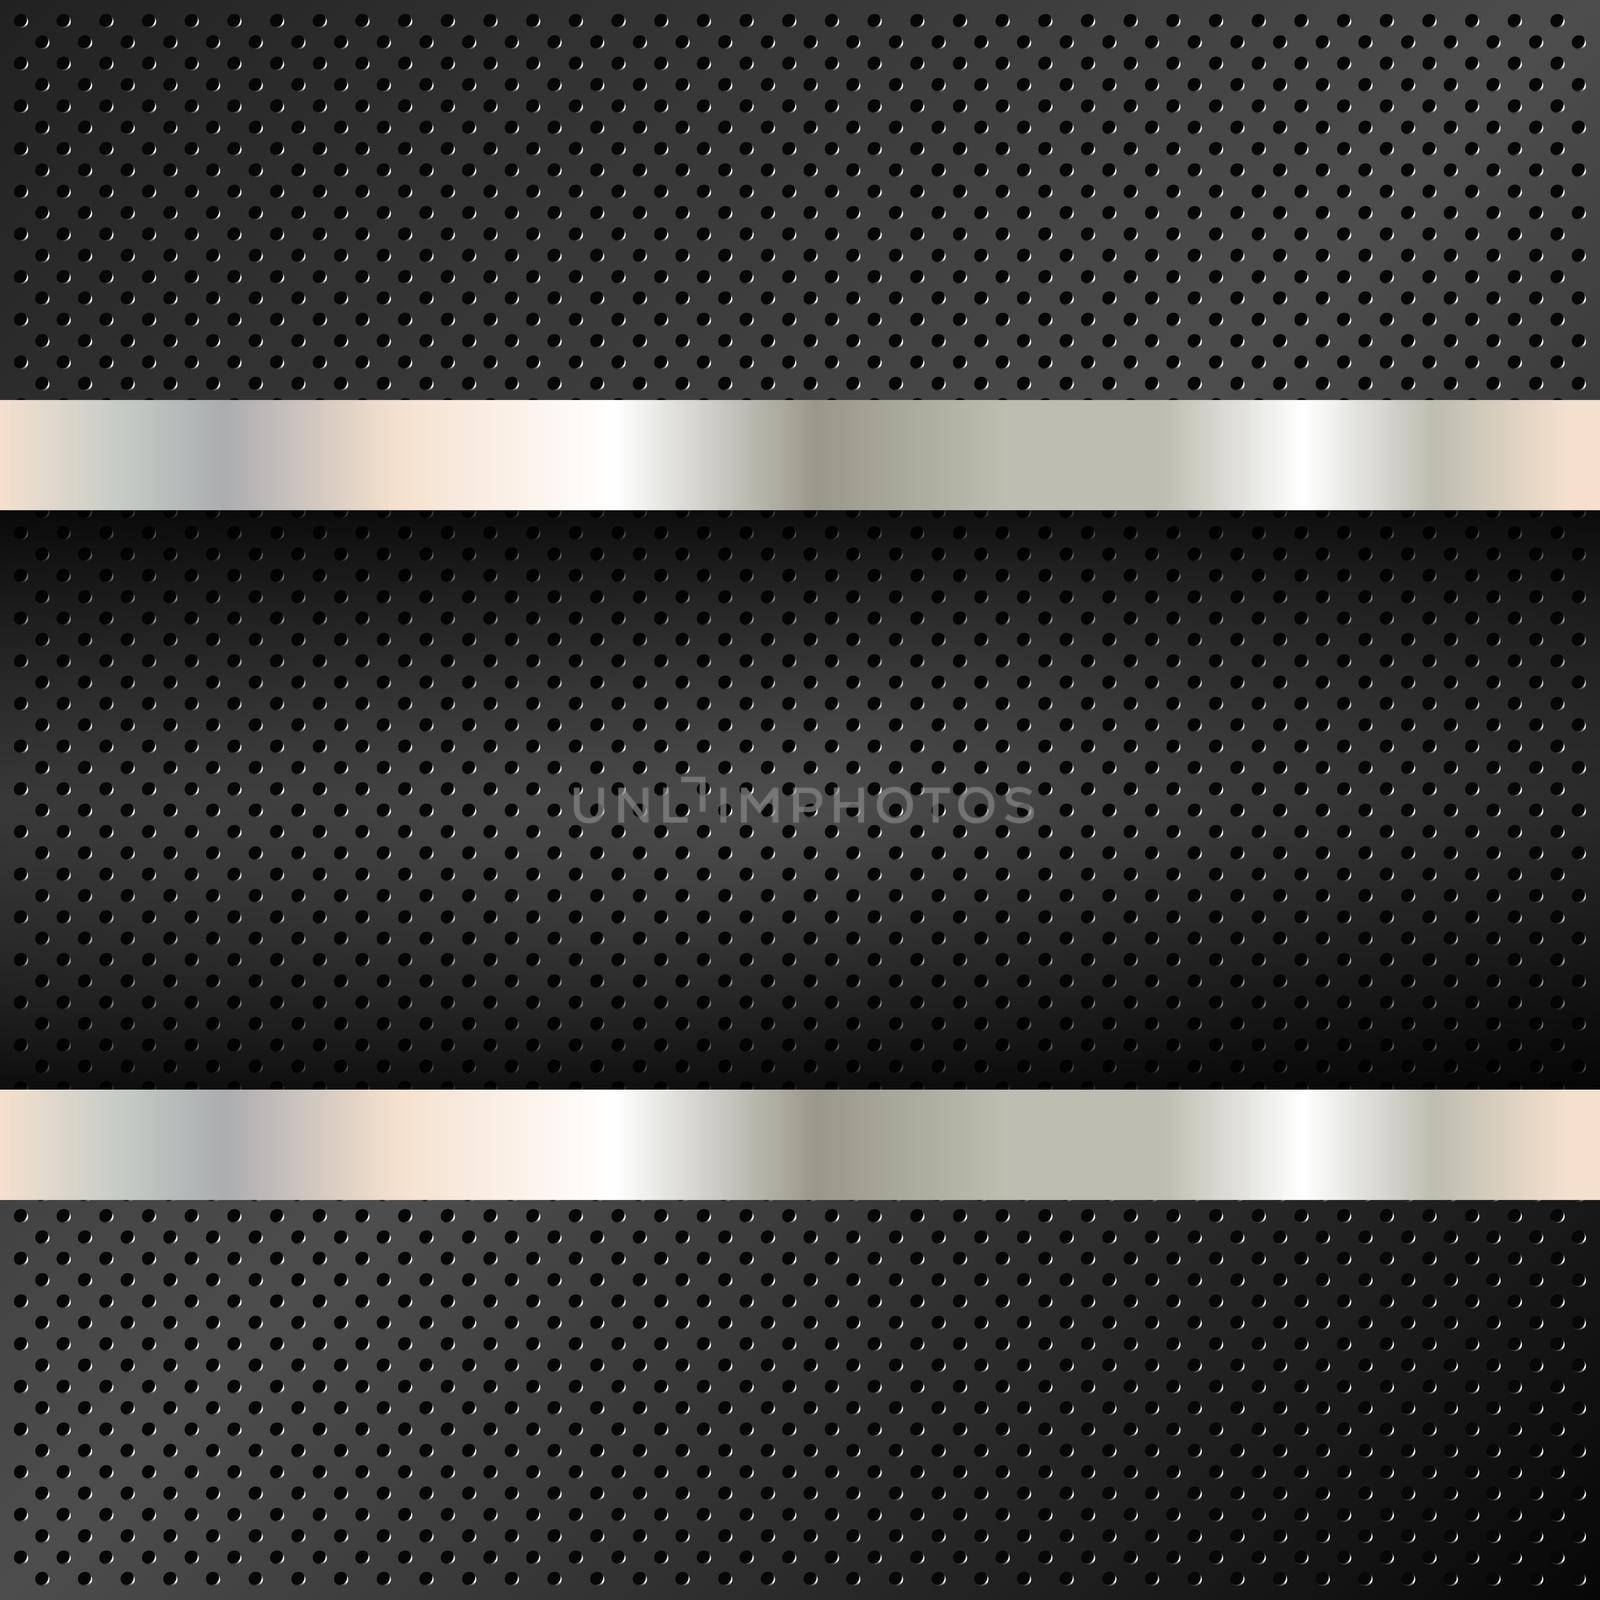 Technology background perforated circles by Bobnevv